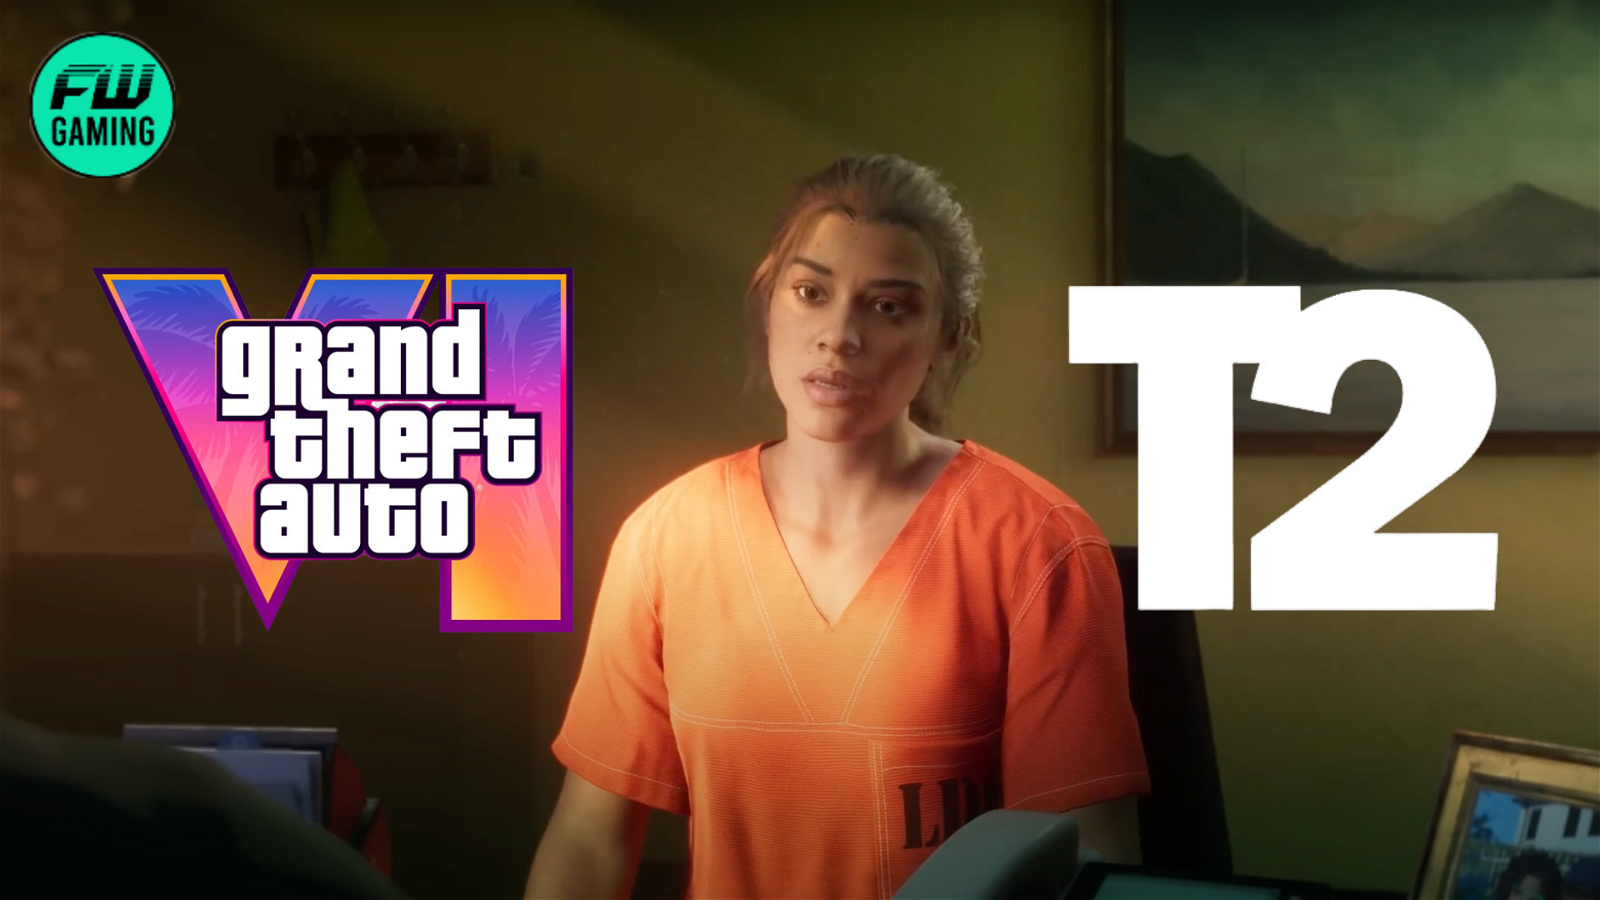 IGN - Grand Theft Auto 6 will be released in 2025 on PlayStation 5 and Xbox  Series X/S, with Rockstar Games so far making no mention on whether the  game will be